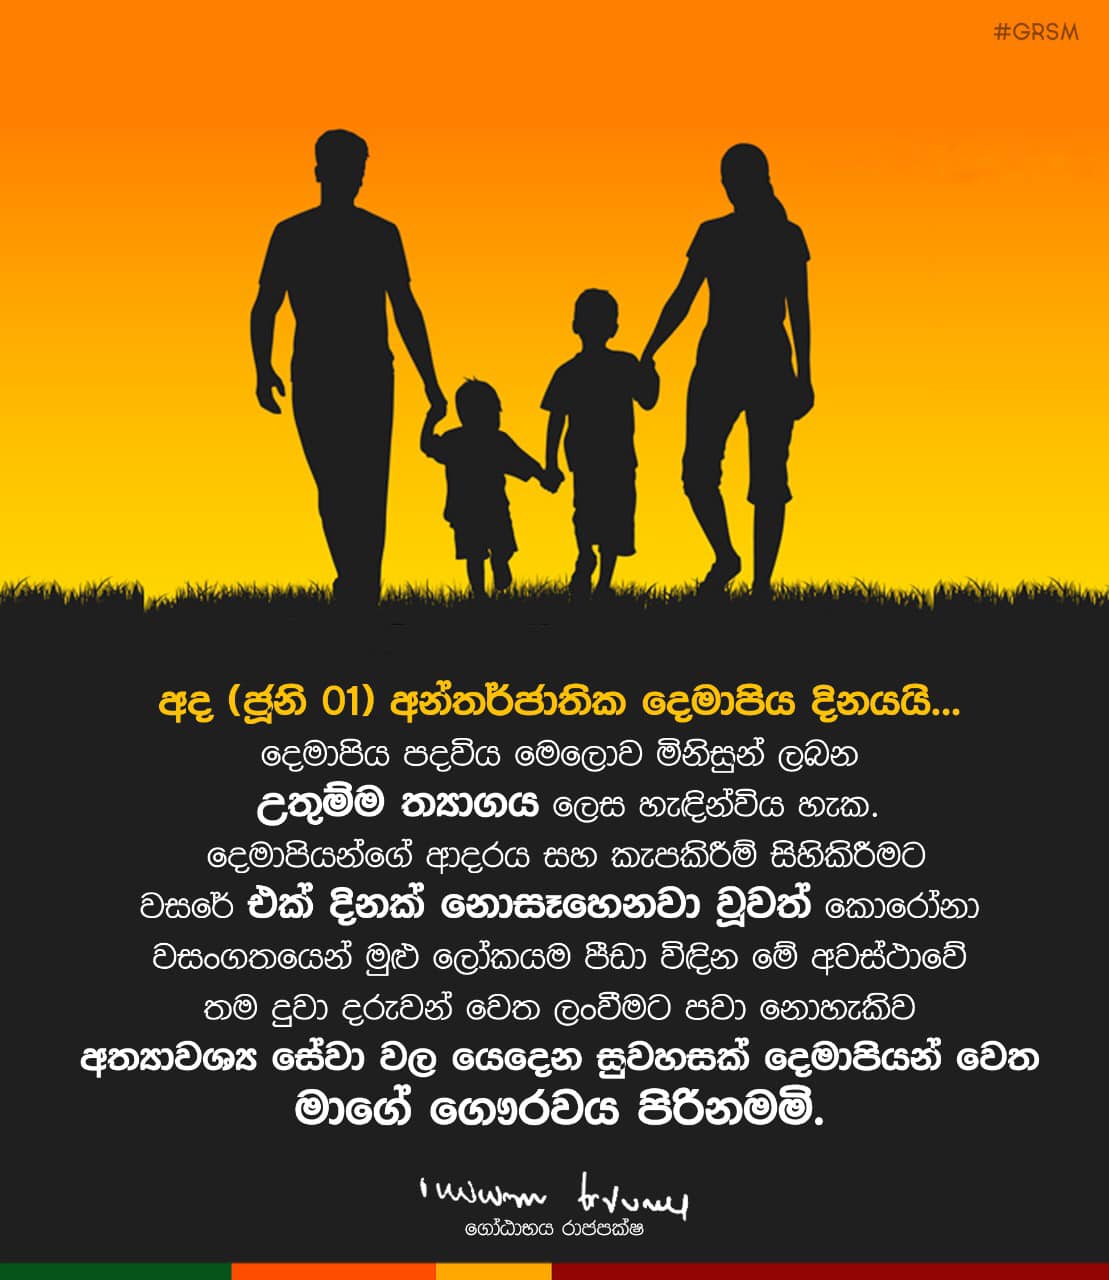 June 01 is the International Parents' Day.